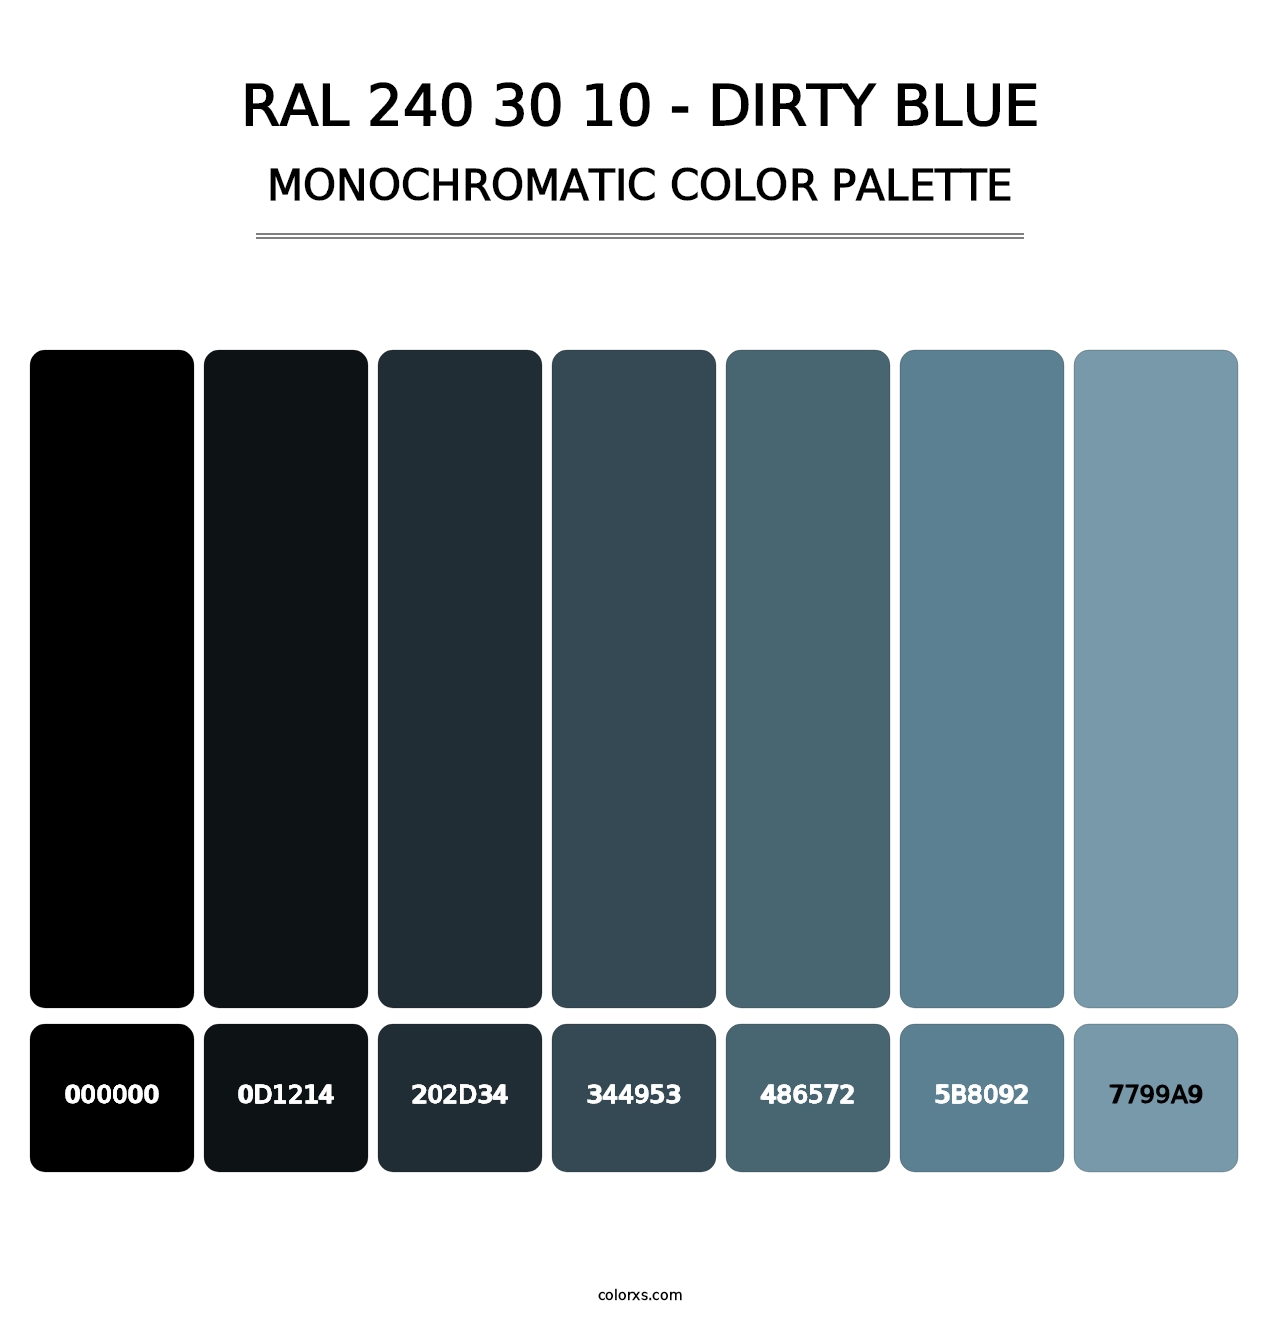 RAL 240 30 10 - Dirty Blue - Monochromatic Color Palette